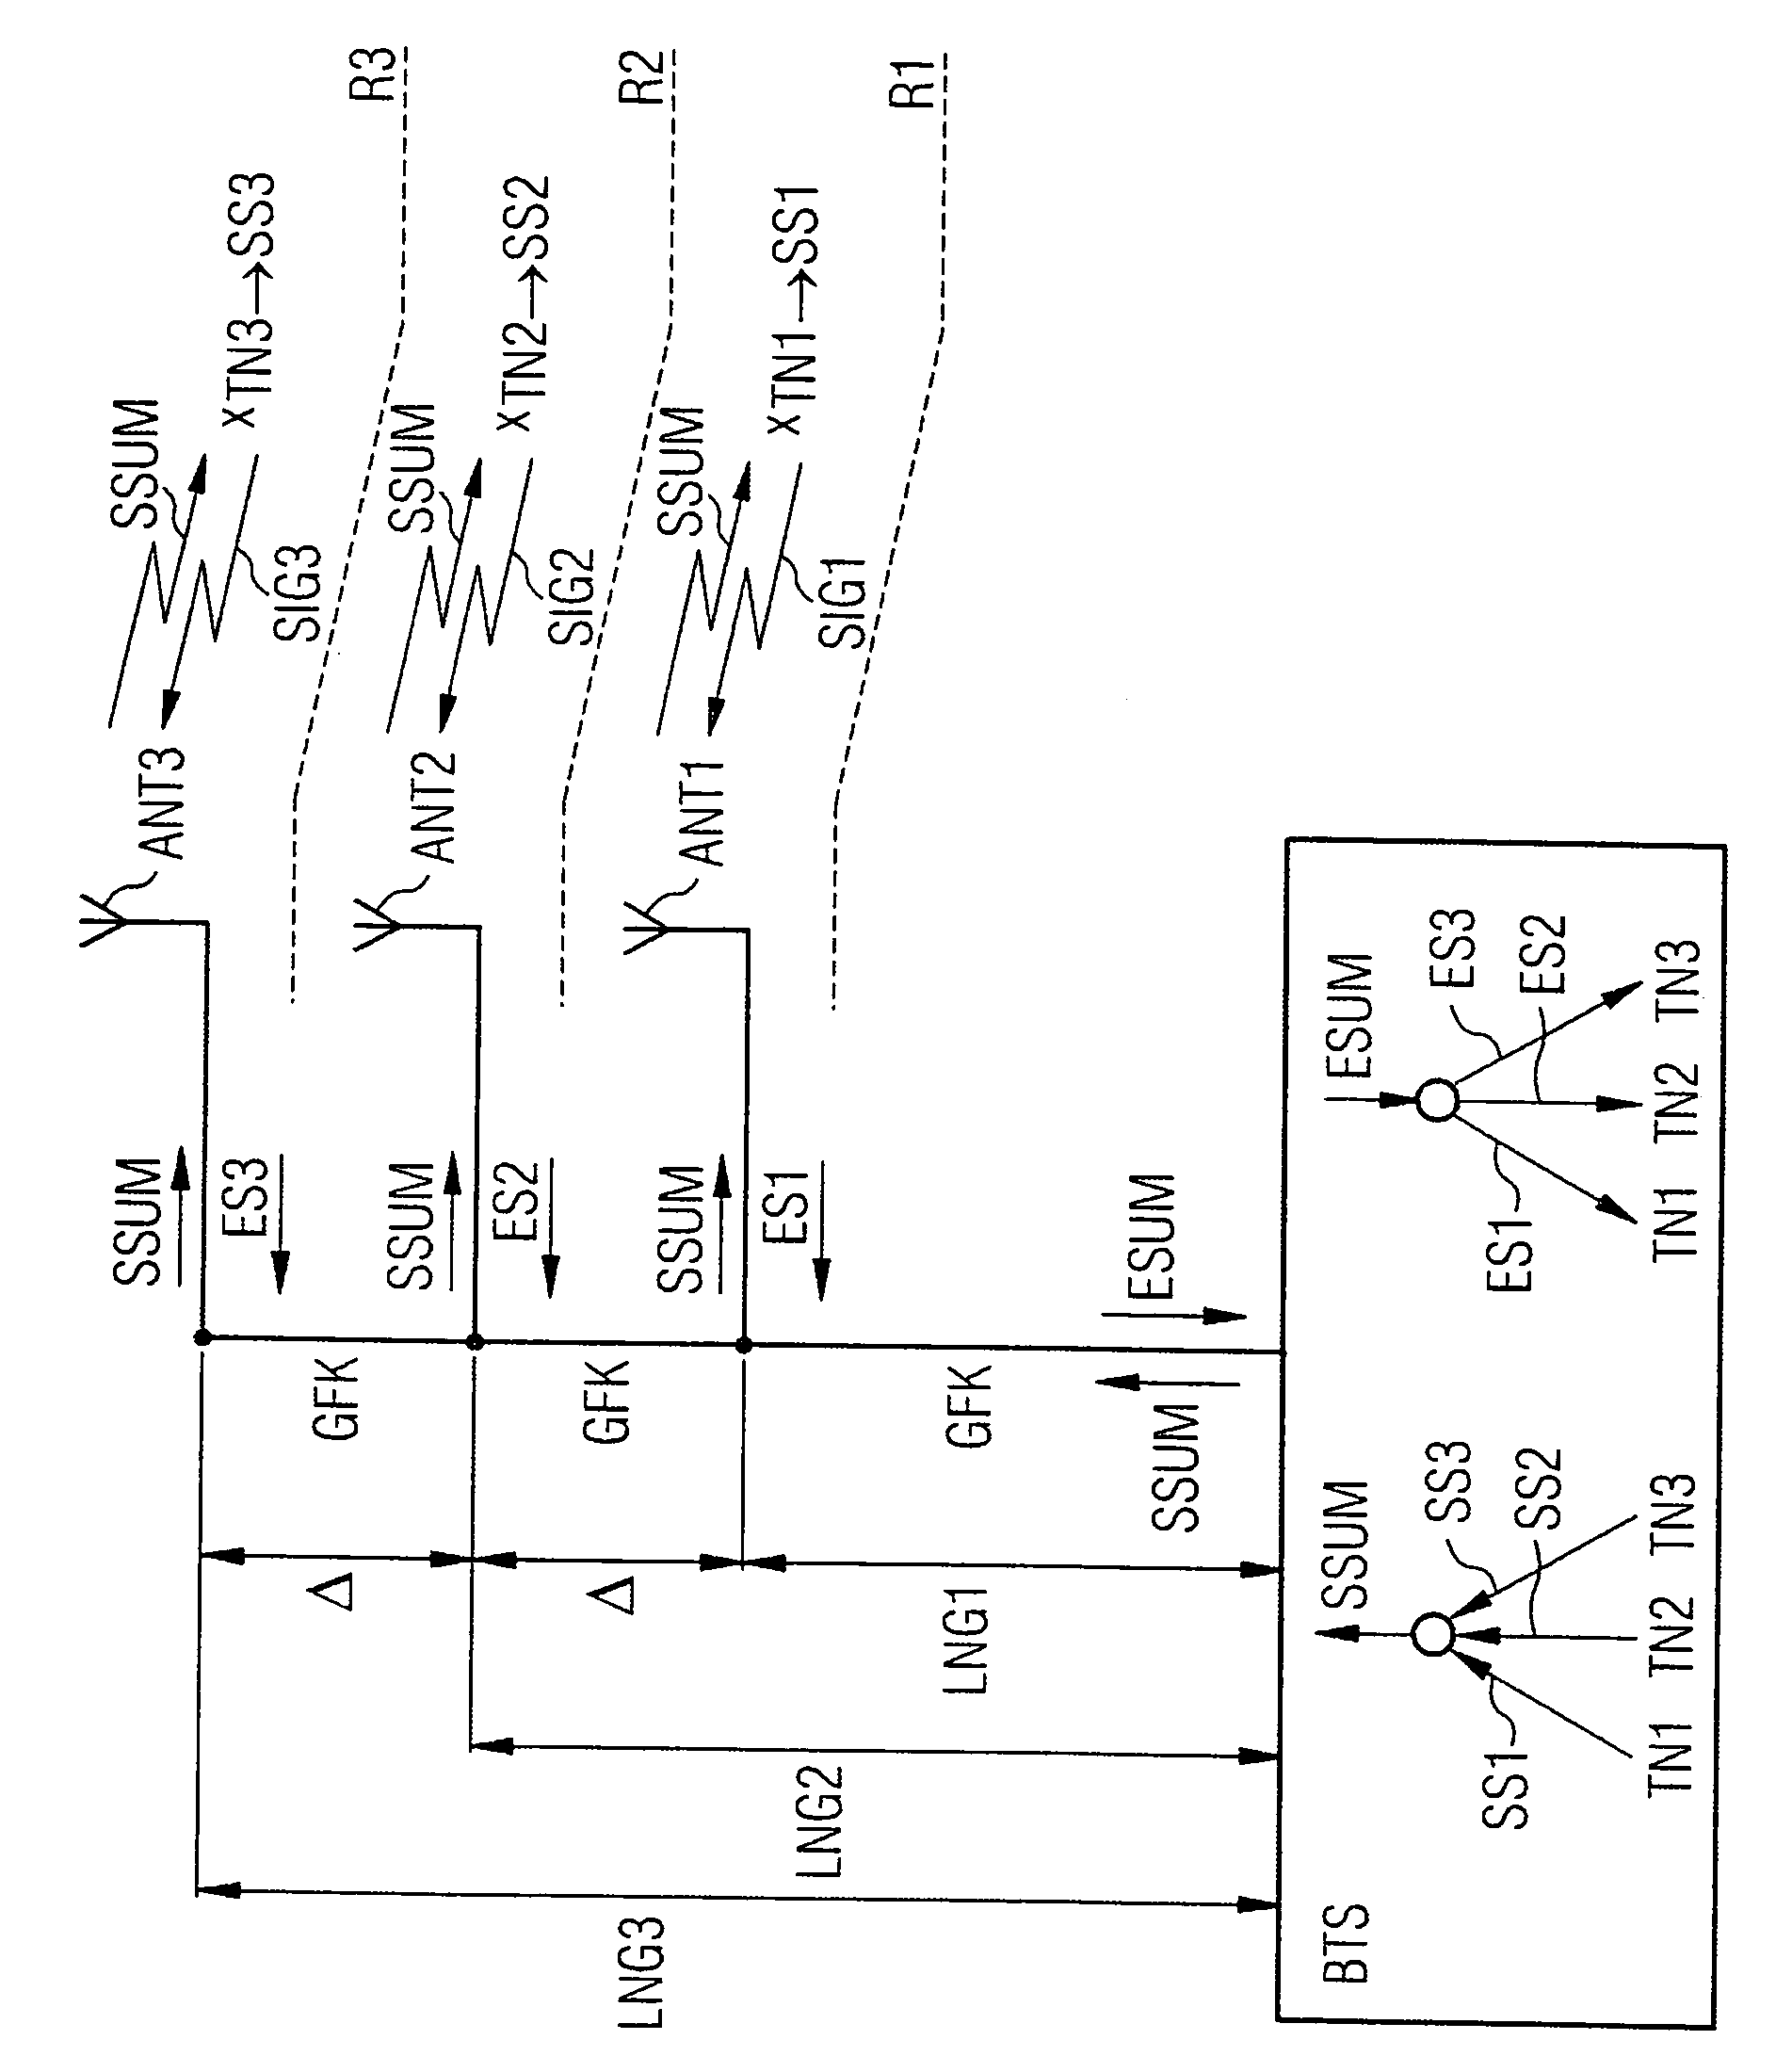 Method for finding the position of a subscriber in a radio communications system